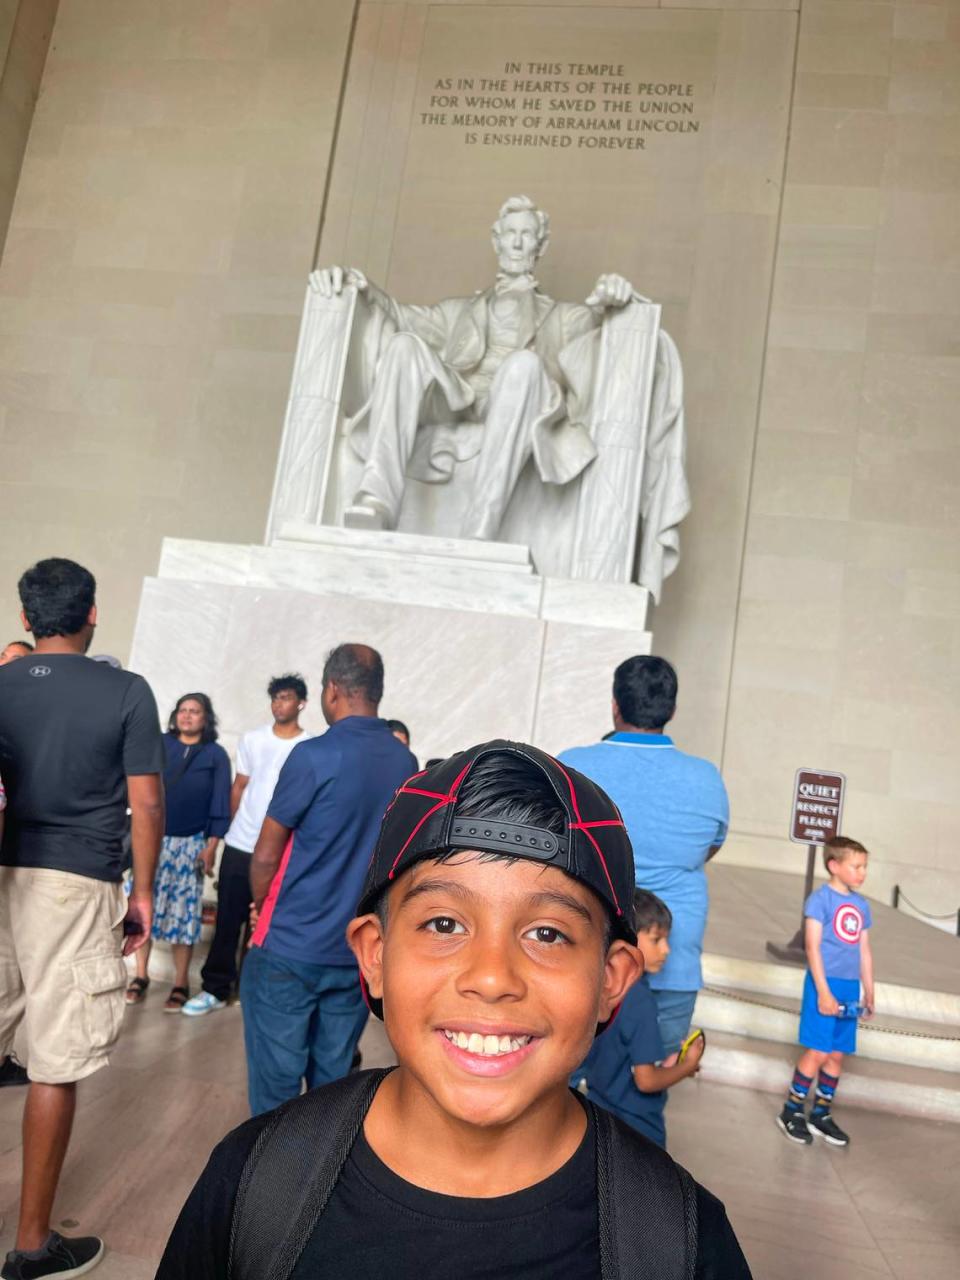 Damian Reynoso, 10, of Modesto was part of the national youth delegation organized by JDRF and has been an ambassador and advocate for kids with Type 1 diabetes, giving him the chance to tell his story in the nation’s capital this month. Paola Reynosa